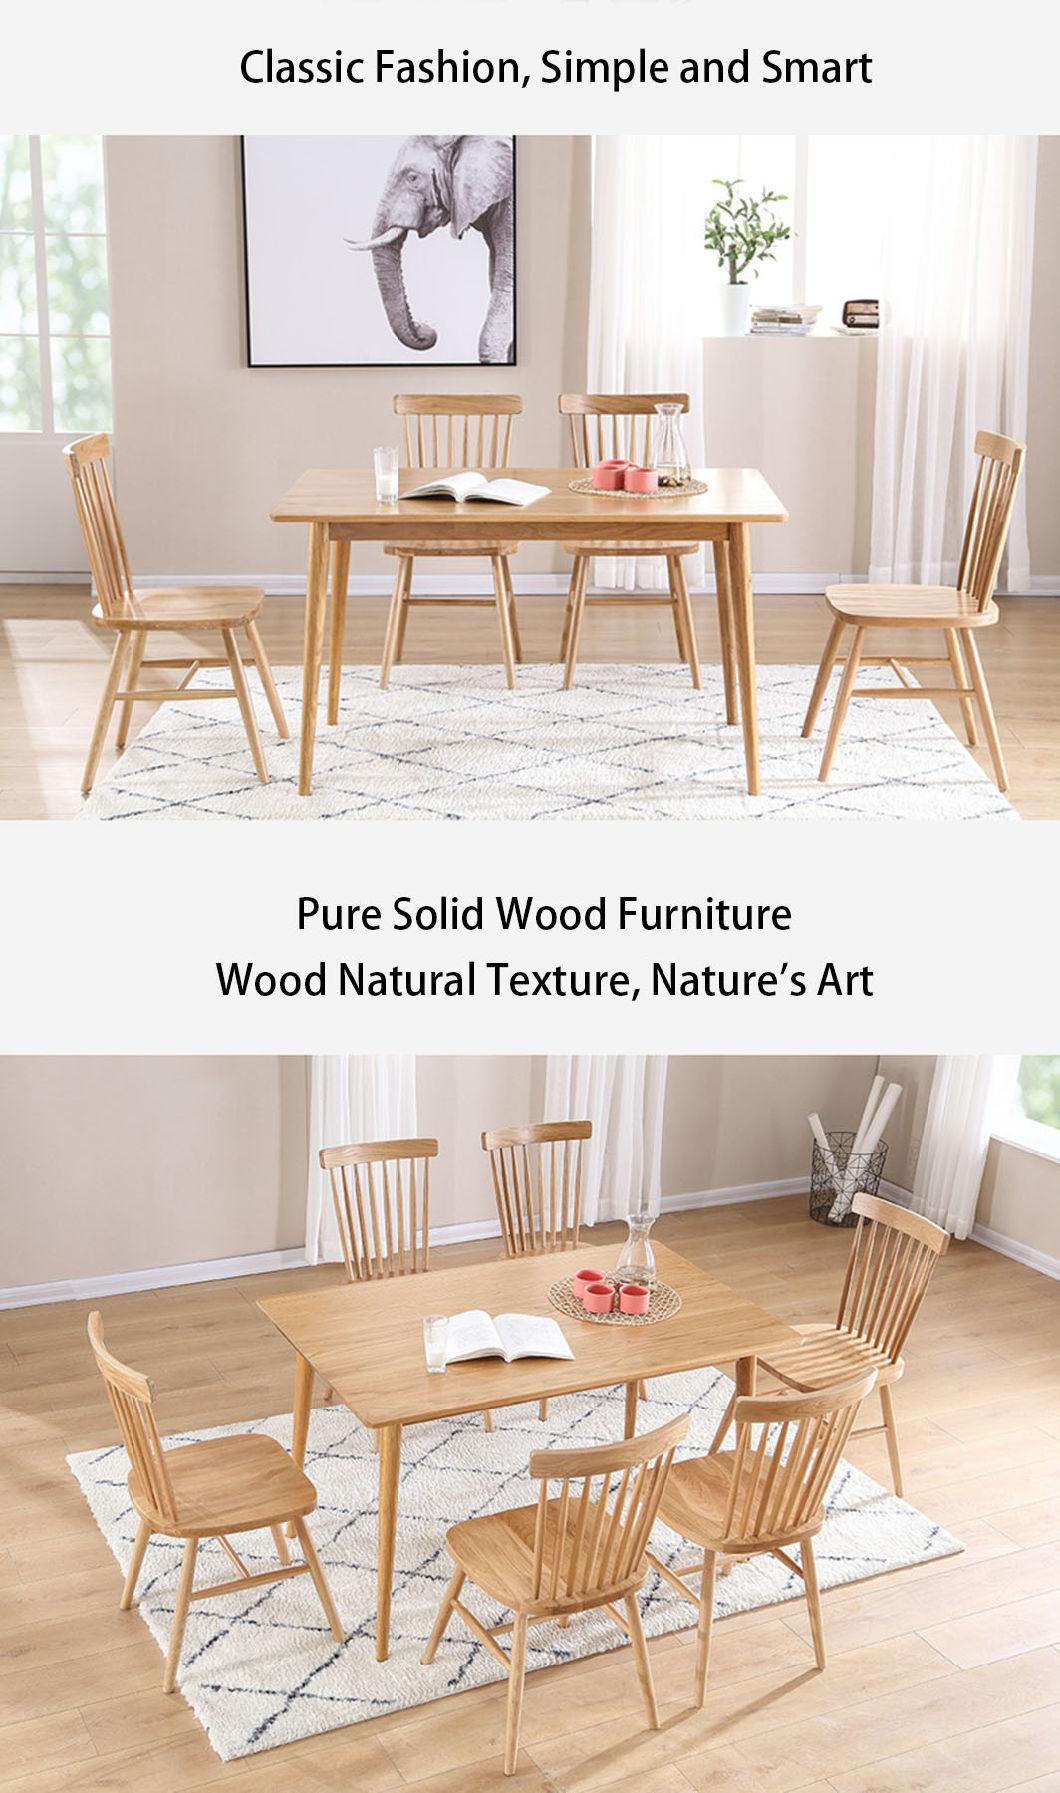 New Hot Sale Unique Design Wood Dining Table/Solid American White Oak Table